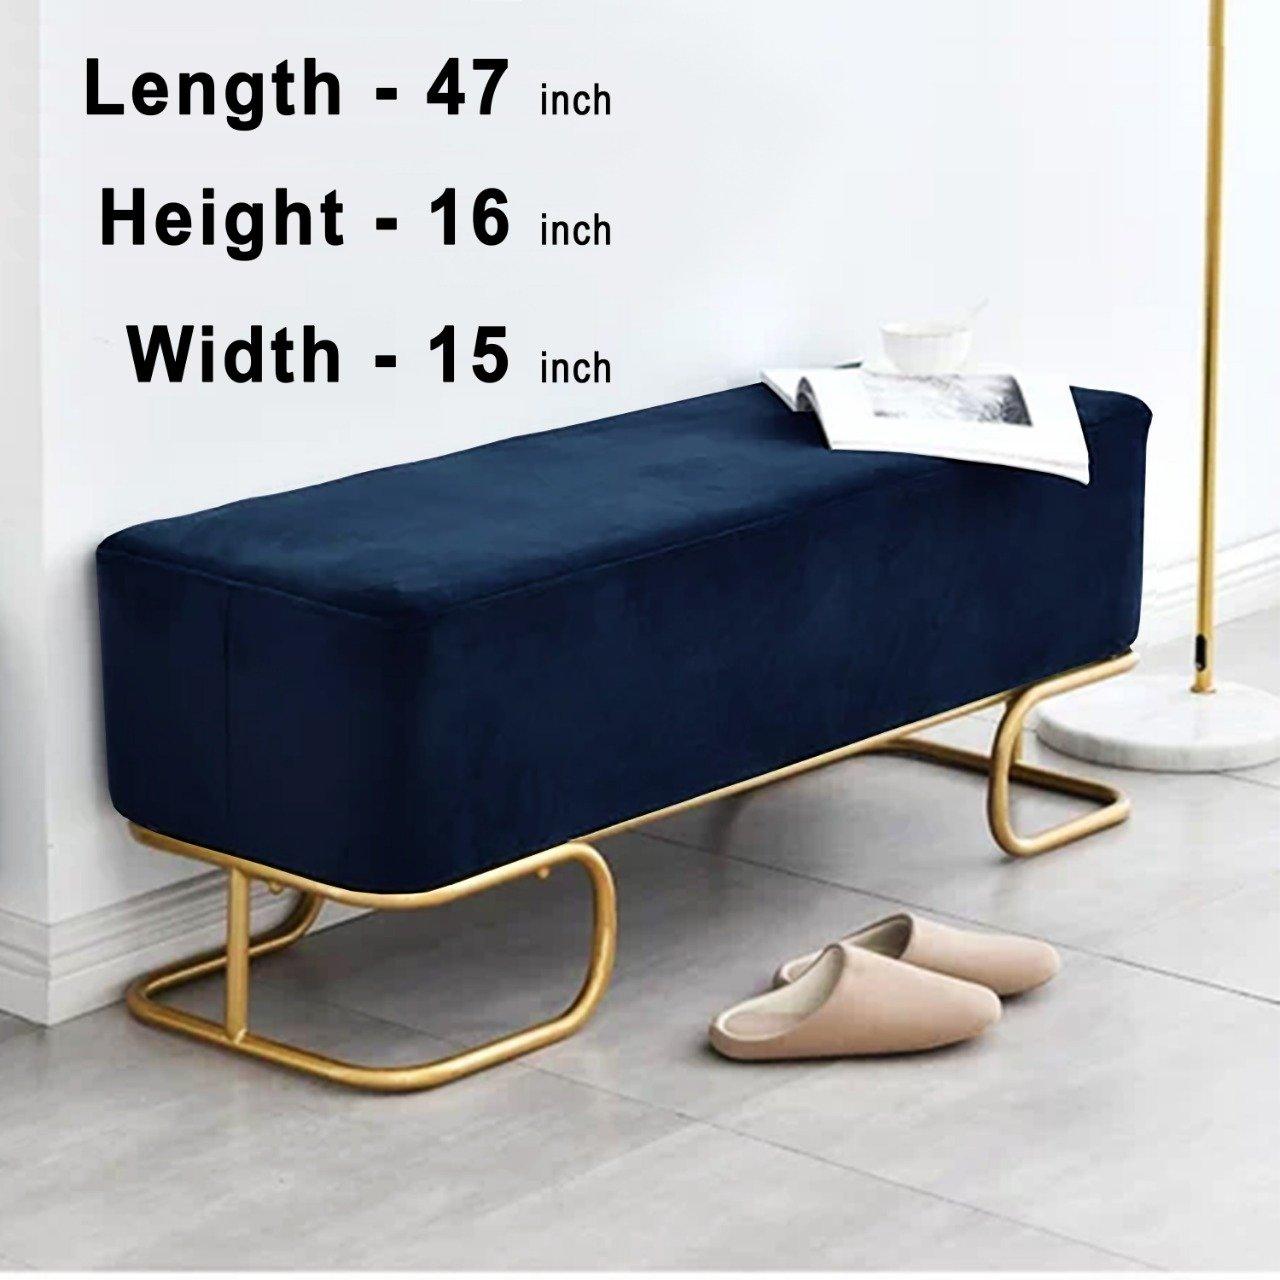 Luxury Wooden stool 3 Seater With Steel Stand -329 - 92Bedding